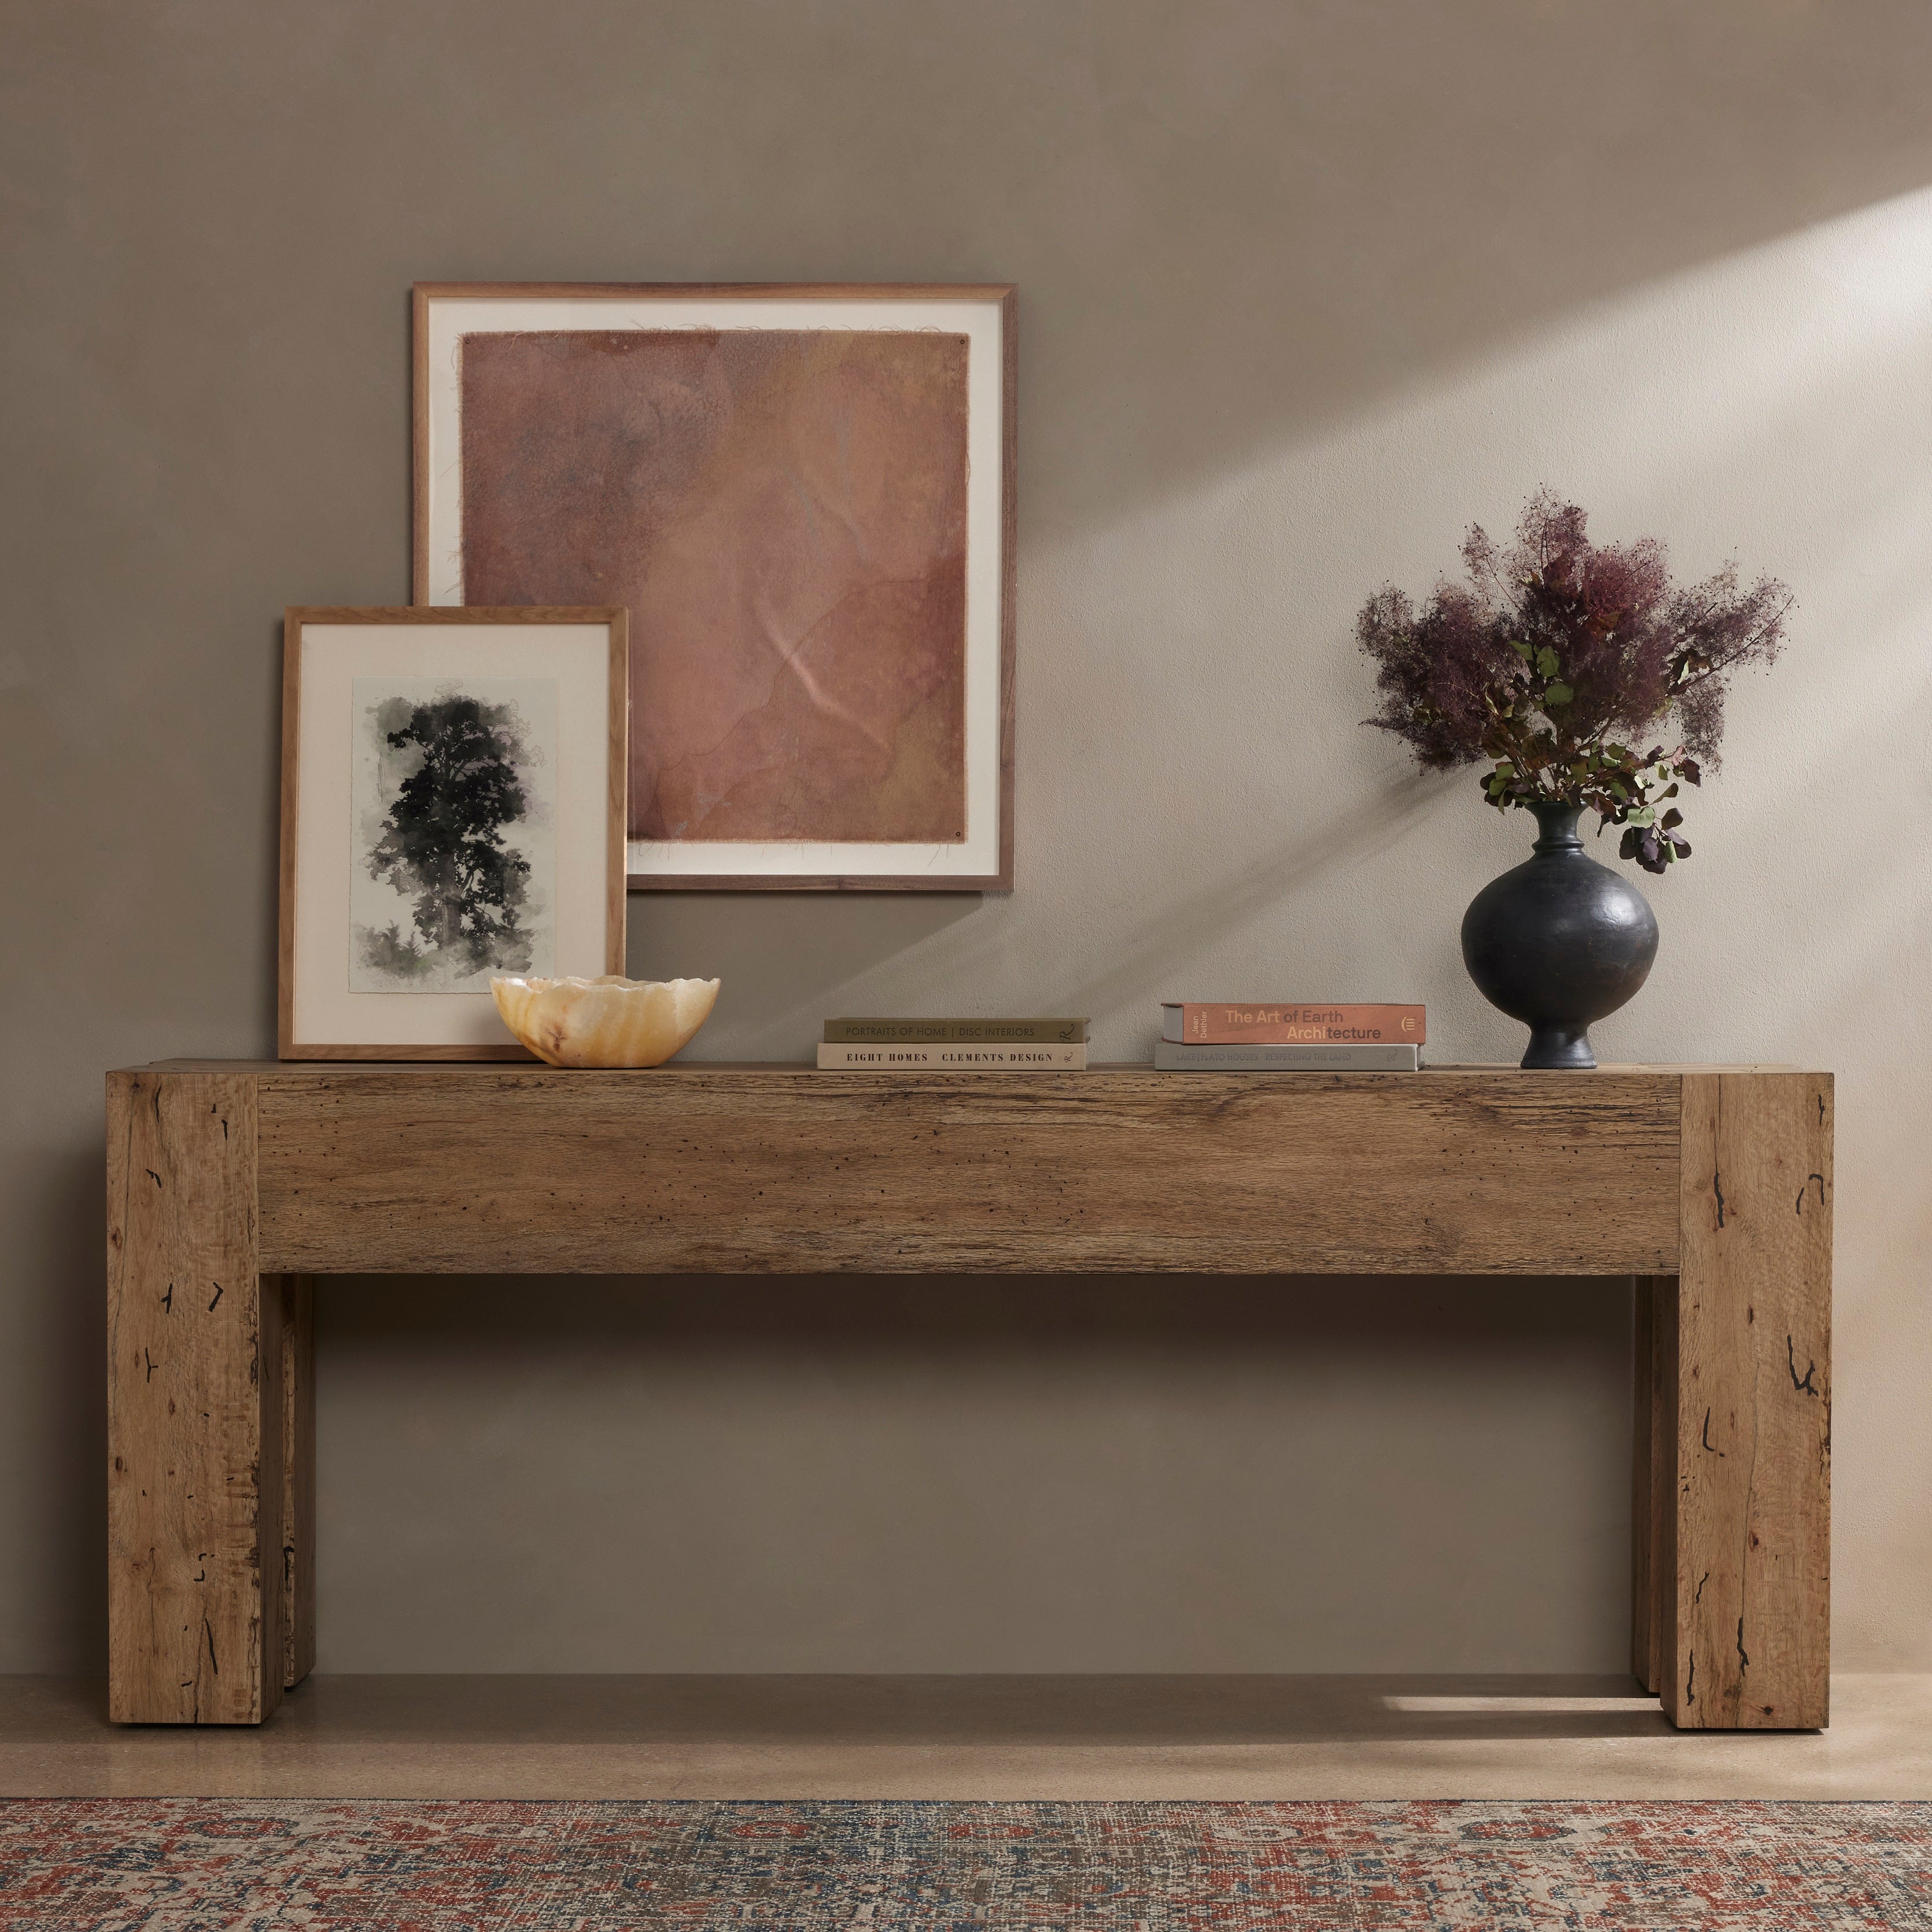 Made from thick-cut oak veneer with a faux rustic finish made to emulate wormwood, this Abaso Rustic Wormwood Oak Console Table features chunky squared legs and dovetail joinery detailing. Amethyst Home provides interior design services, furniture, rugs, and lighting in the Calabasas metro area.